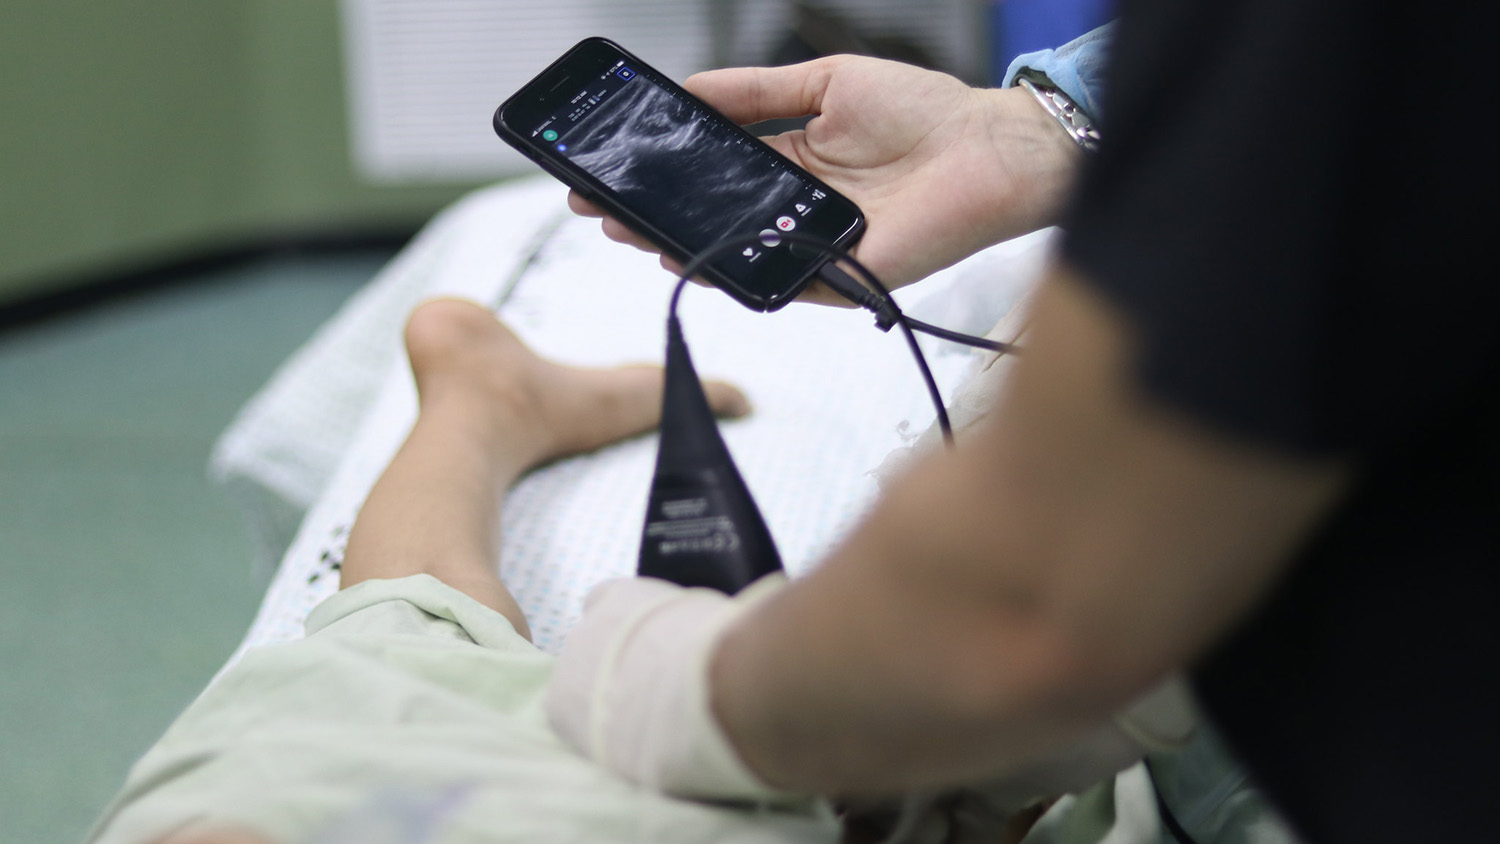 healthcare workers use ultrasound connected to a smartphone in an emergency room